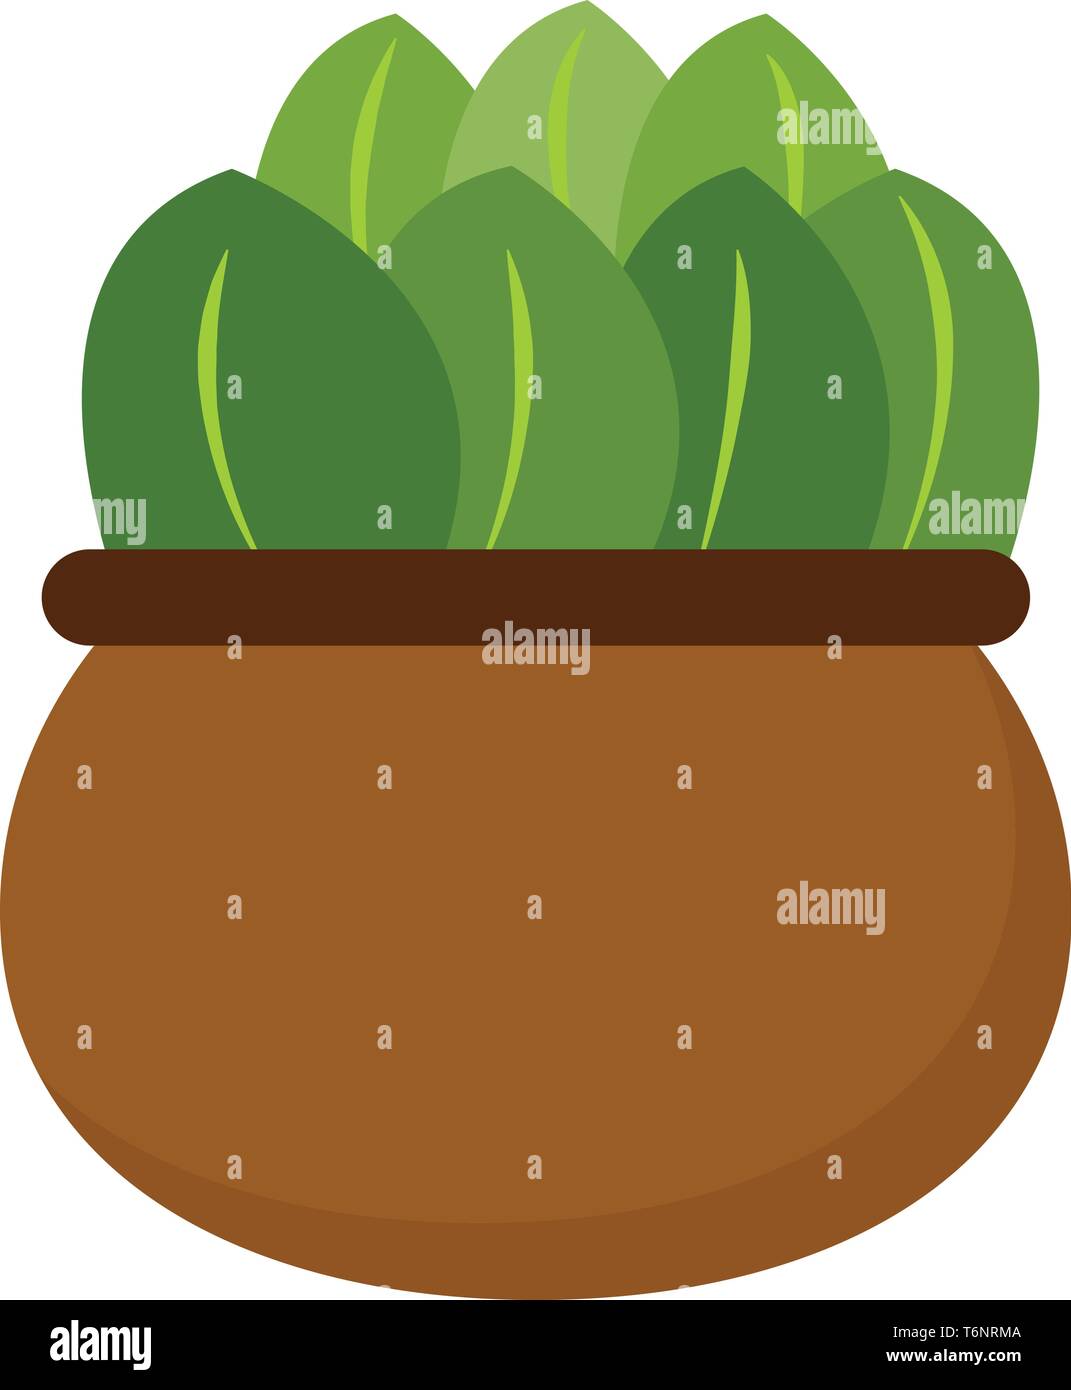 Clipart of a green plant with oval-shaped leaves and yellow margins potted on a brown earthen pot  vector  color drawing or illustration Stock Vector